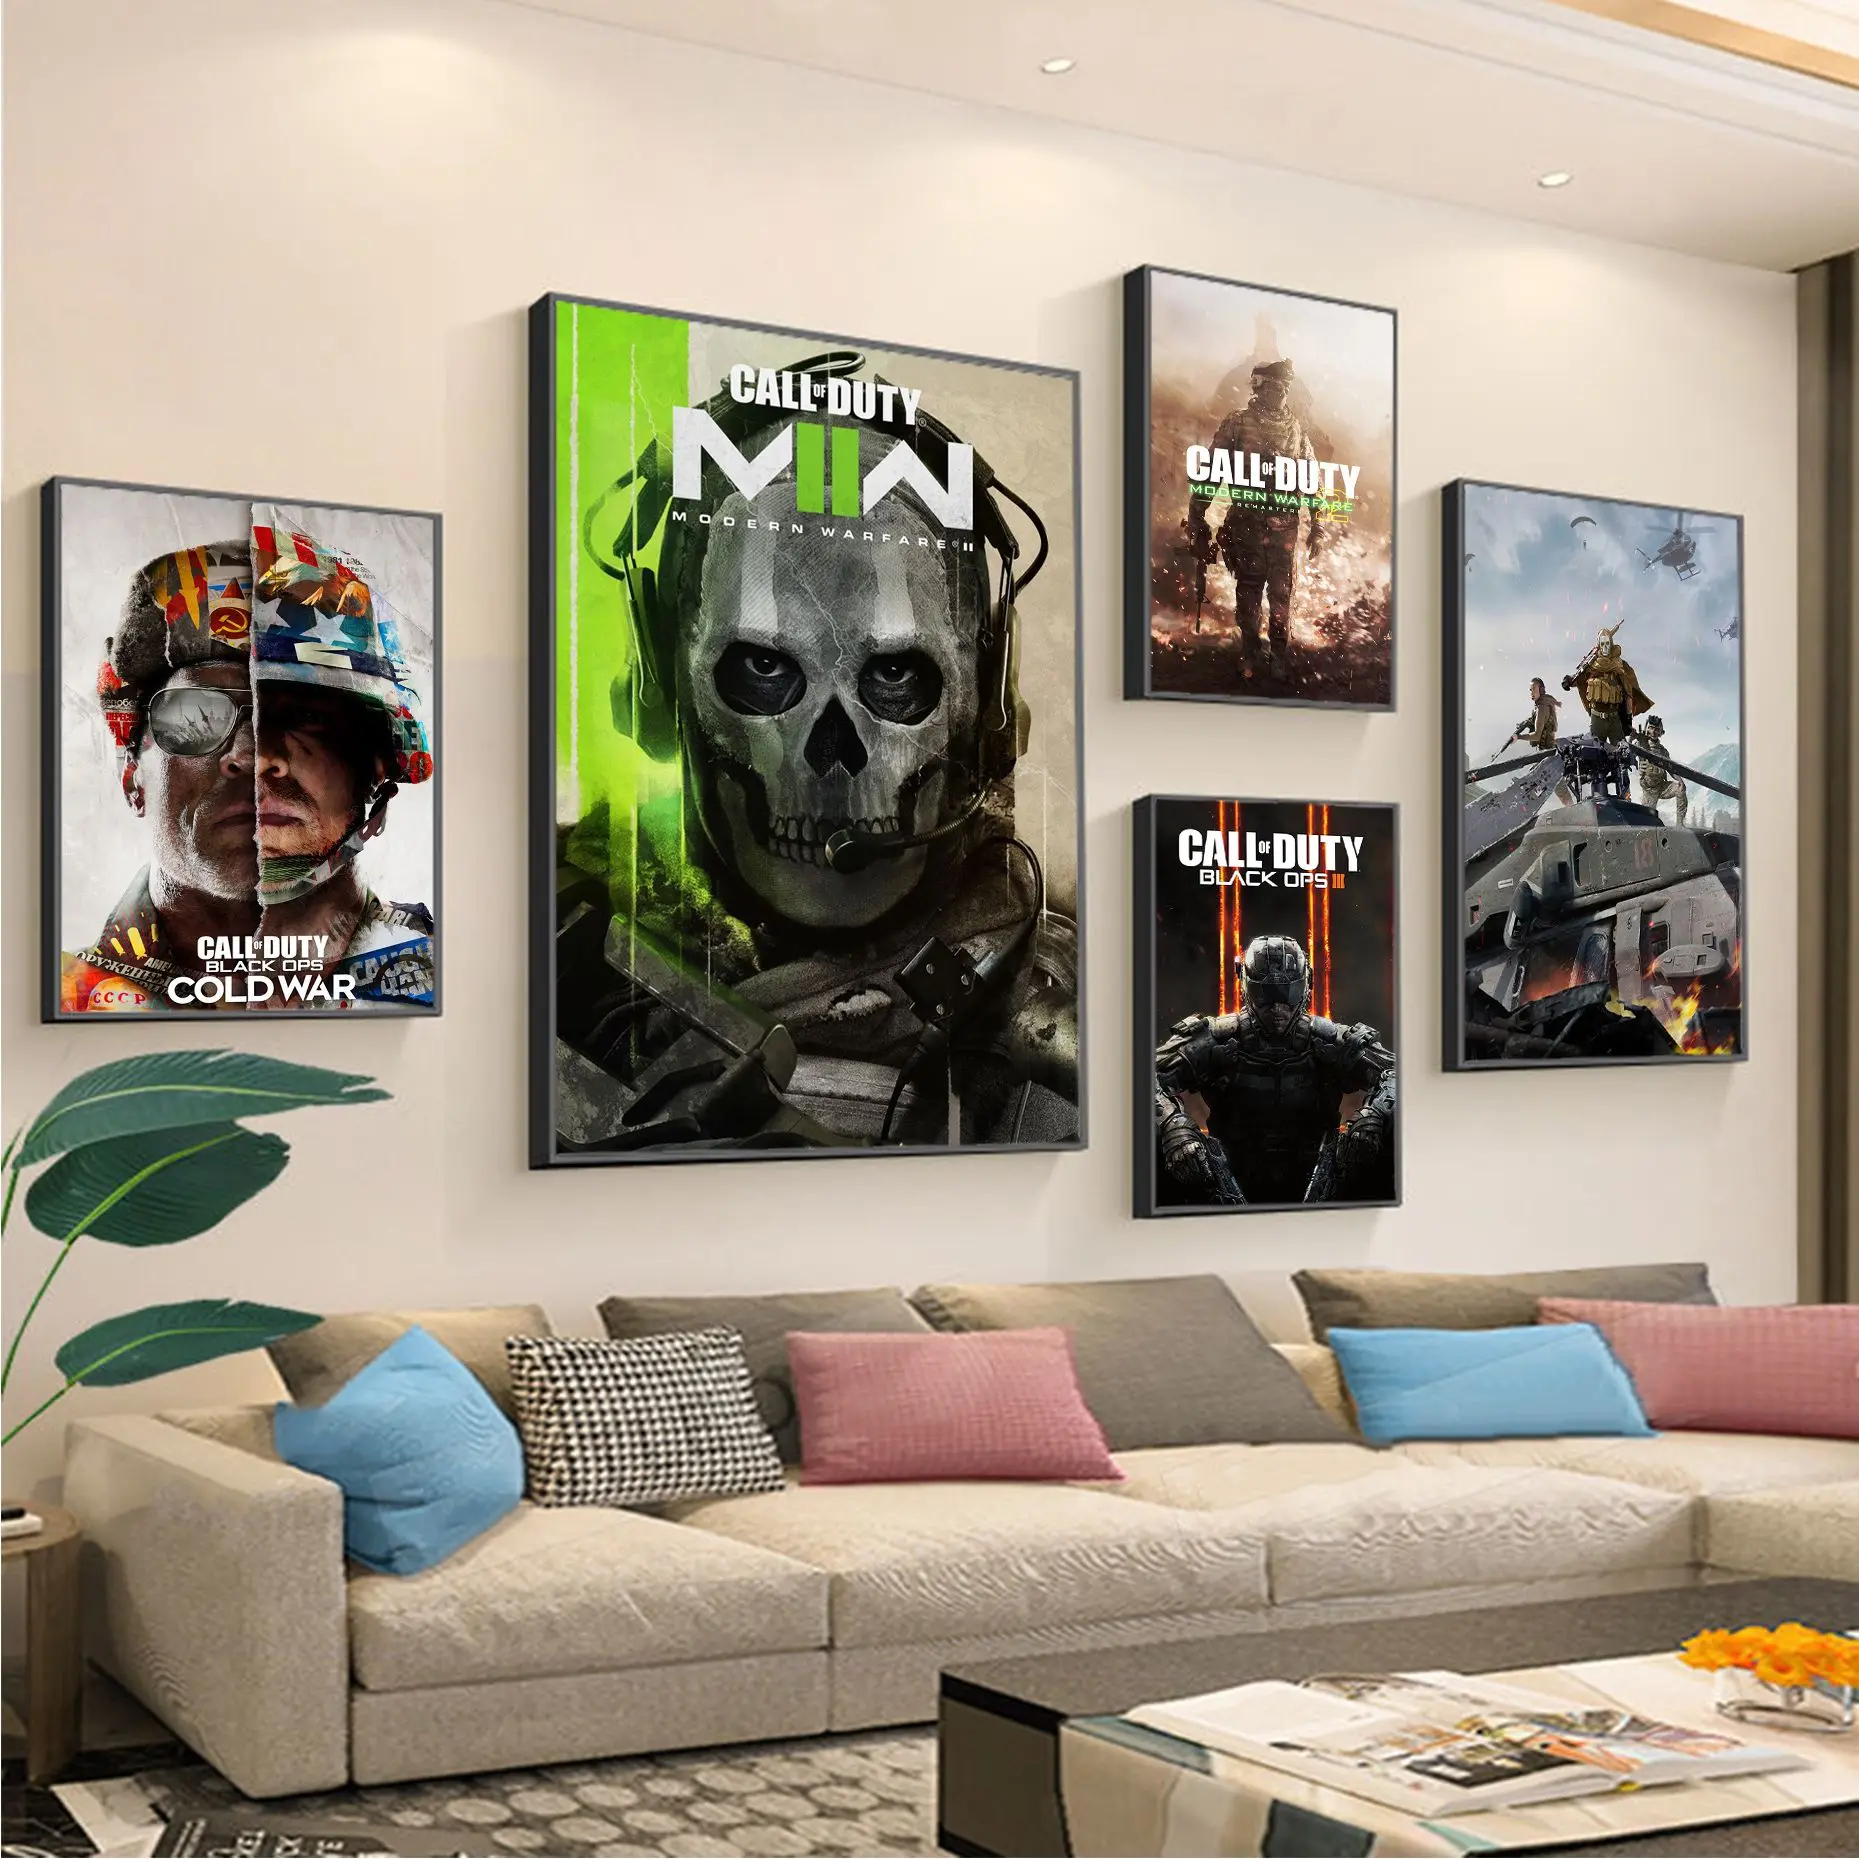 

Call Of Duty Classic Vintage Posters Decoracion Painting Wall Art White Kraft Paper Kawaii Room Decor